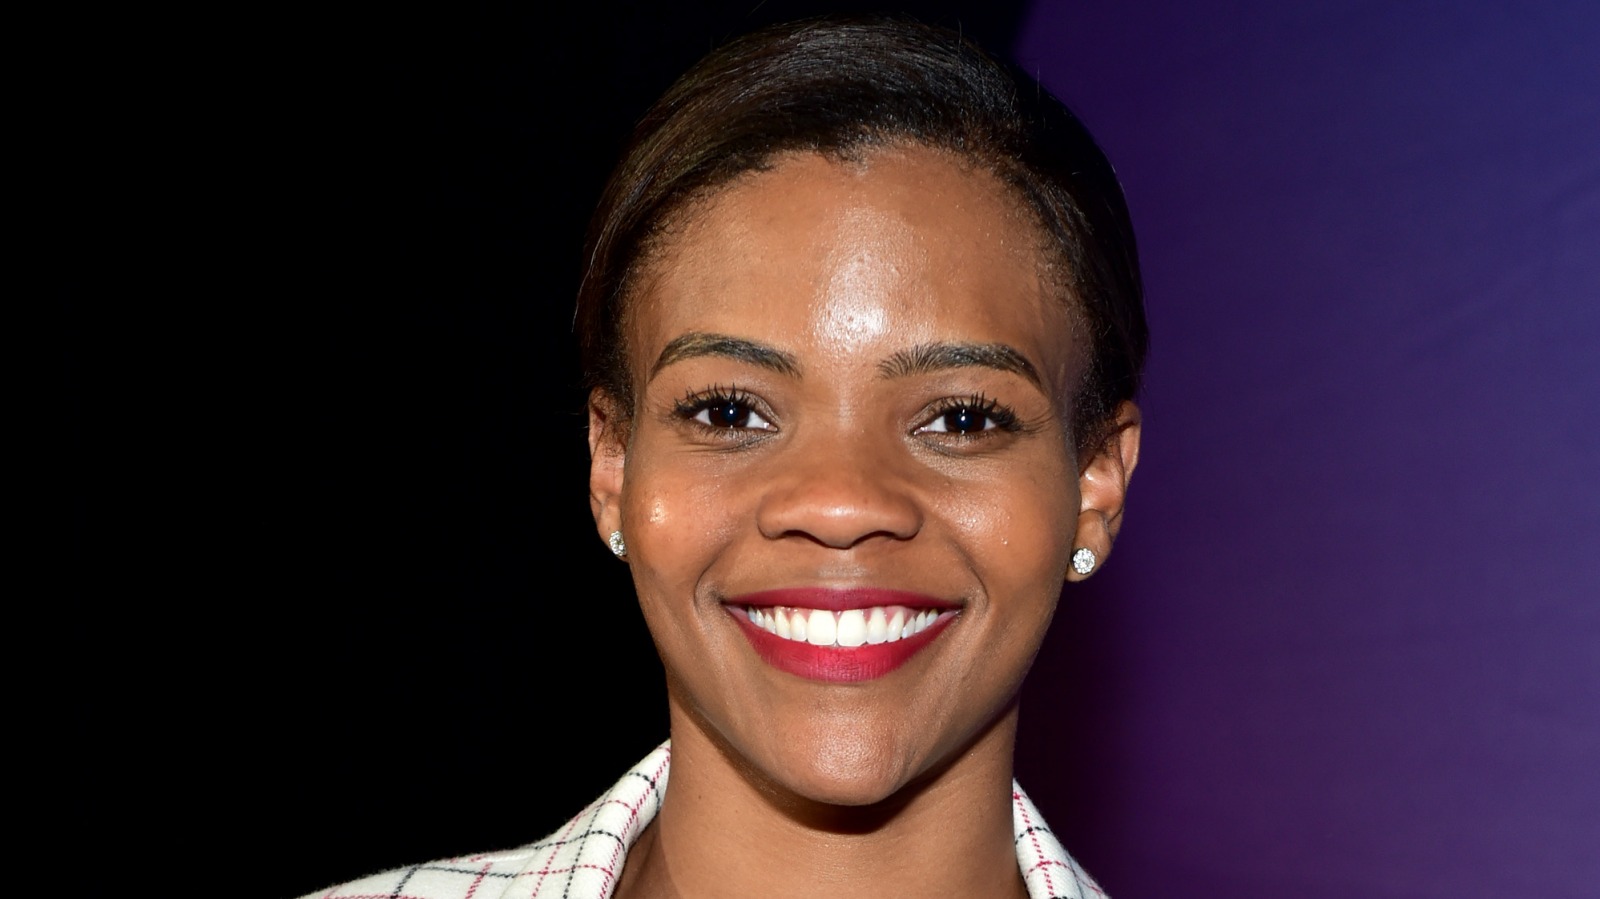 What You Need To Know About Candace Owens.